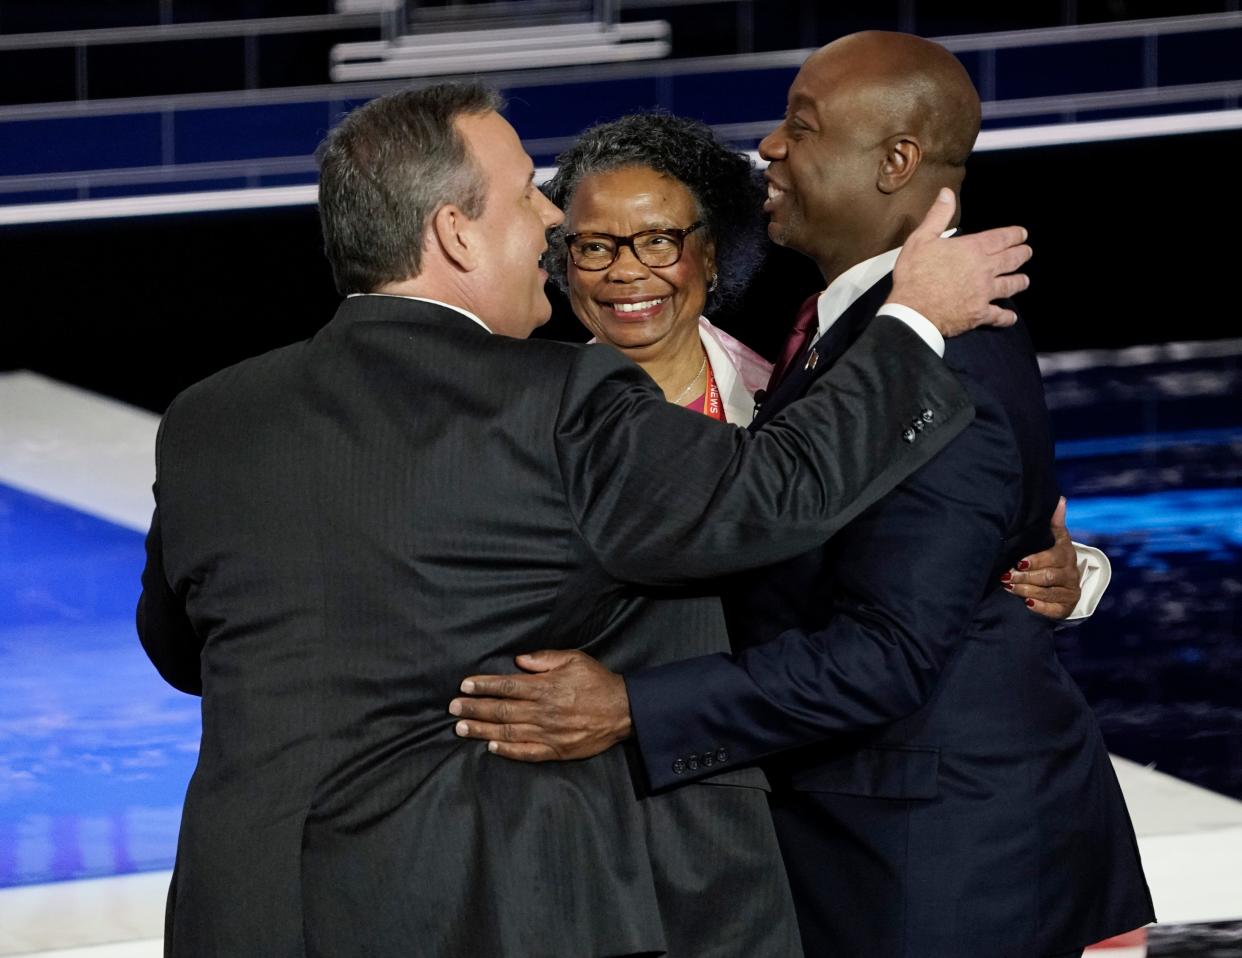 Former New Jersey Gov. Chris Christie with Senator Tim Scott of South Carolina and ScottÕs mother Frances Scott at the conclusion of the Republican National Committee presidential primary debate hosted by NBC News at Adrienne Arsht Center for the Performing Arts of Miami-Dade County.